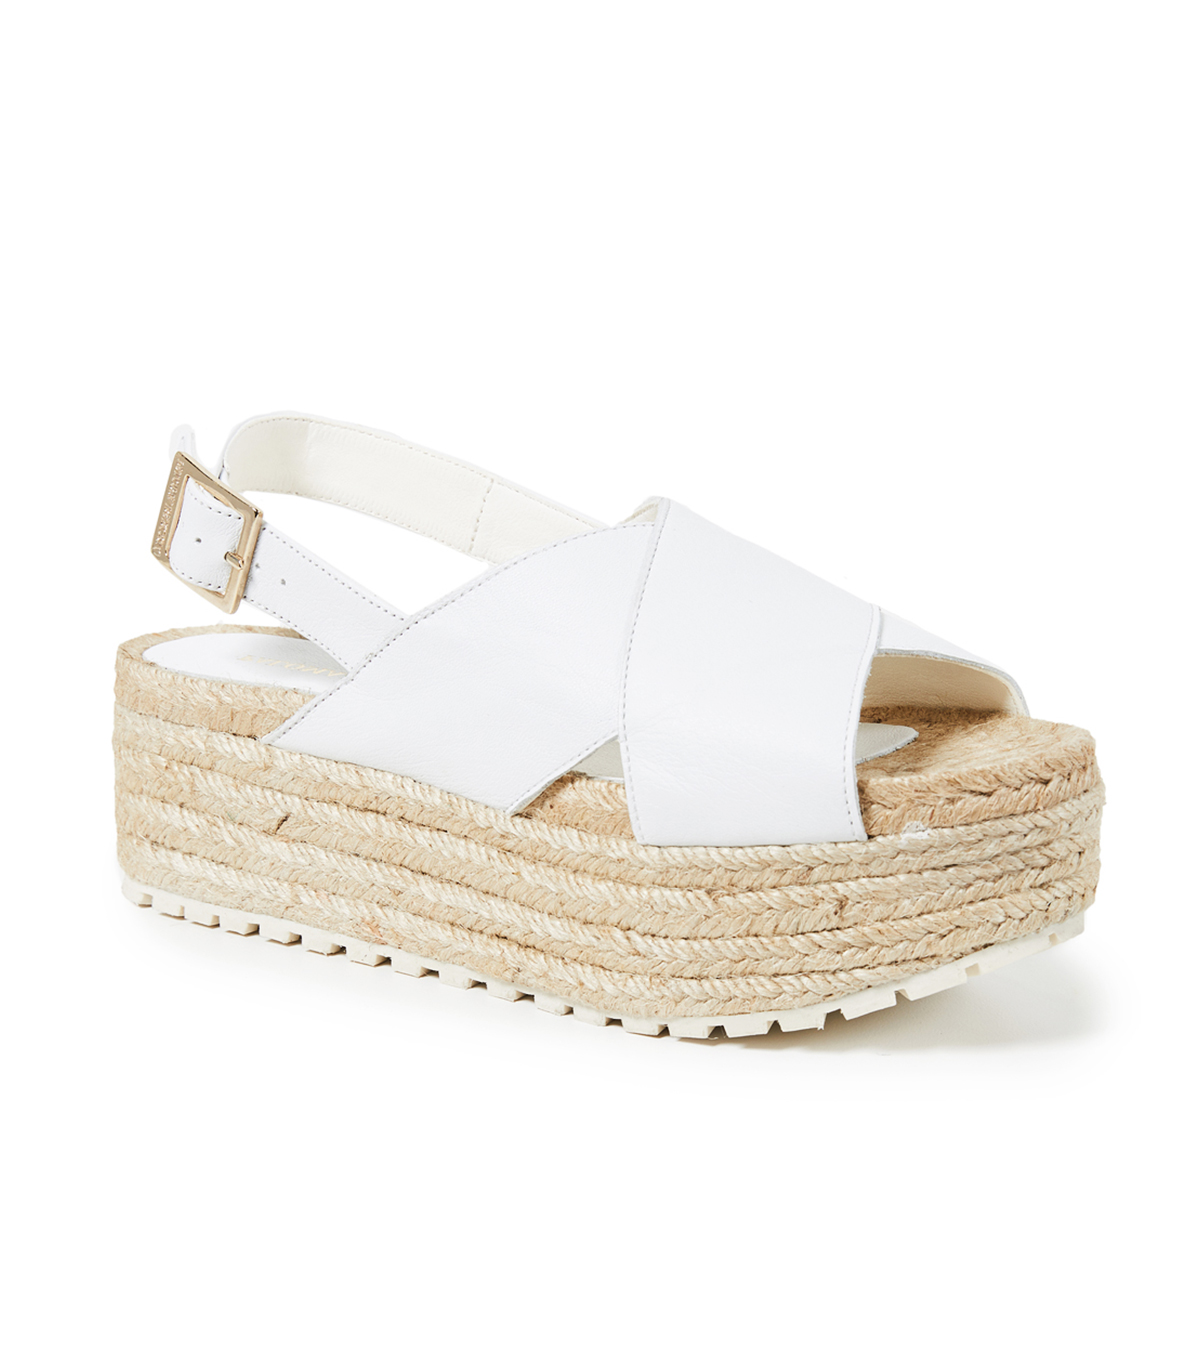 Shoe Enthusiasts, These Cool Platform Sandals Are for You | Who 